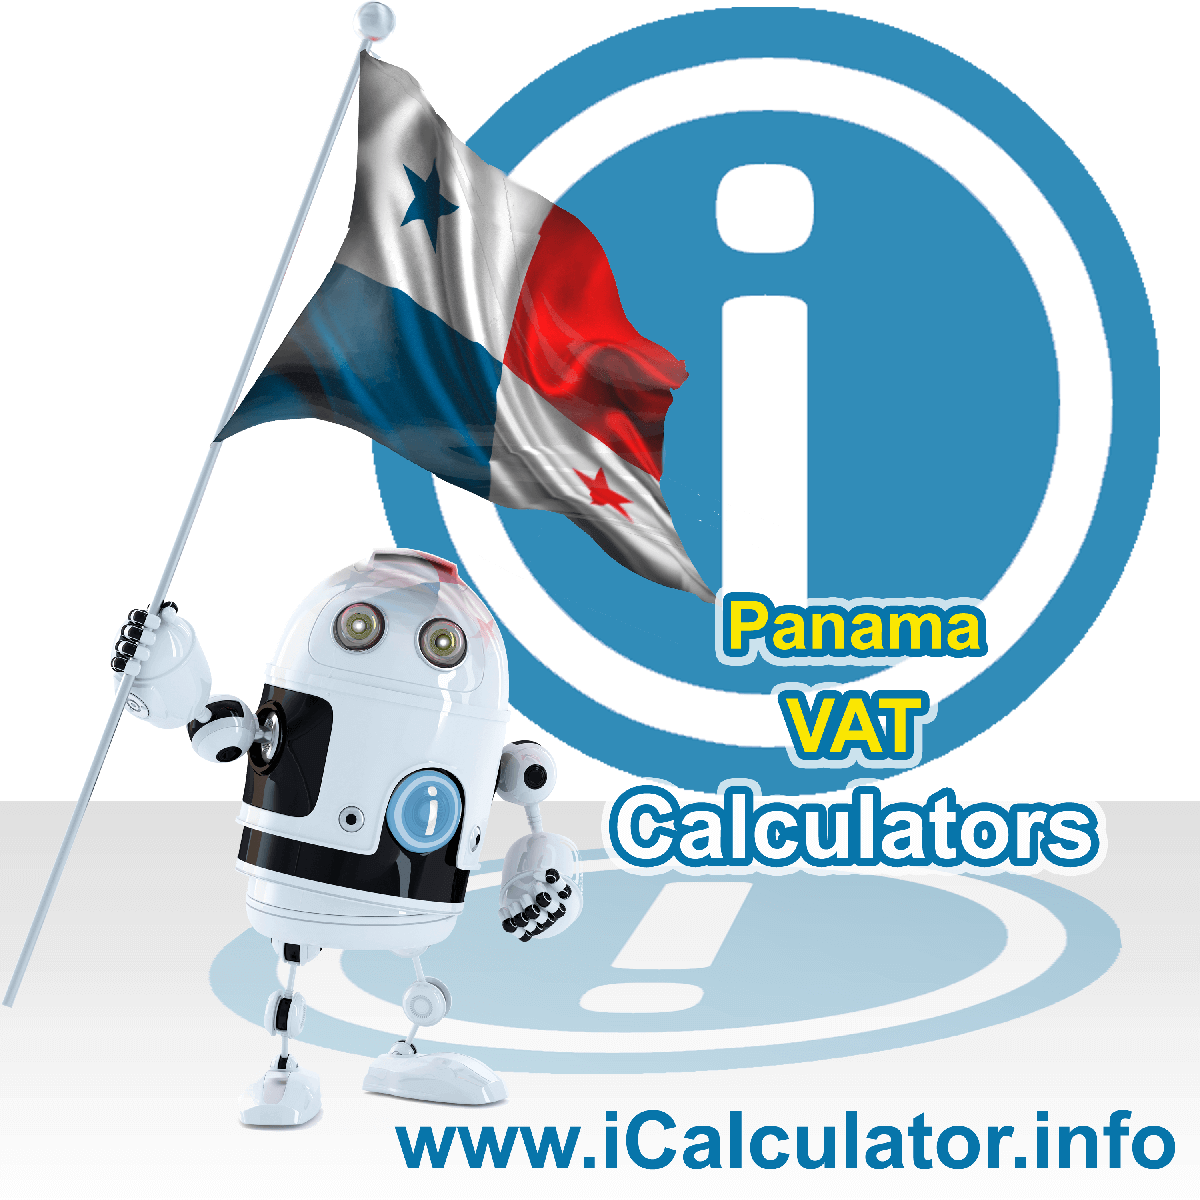 Panama VAT Calculator. This image shows the Panama flag and information relating to the VAT formula used for calculating Value Added Tax in Panama using the Panama VAT Calculator in 2024